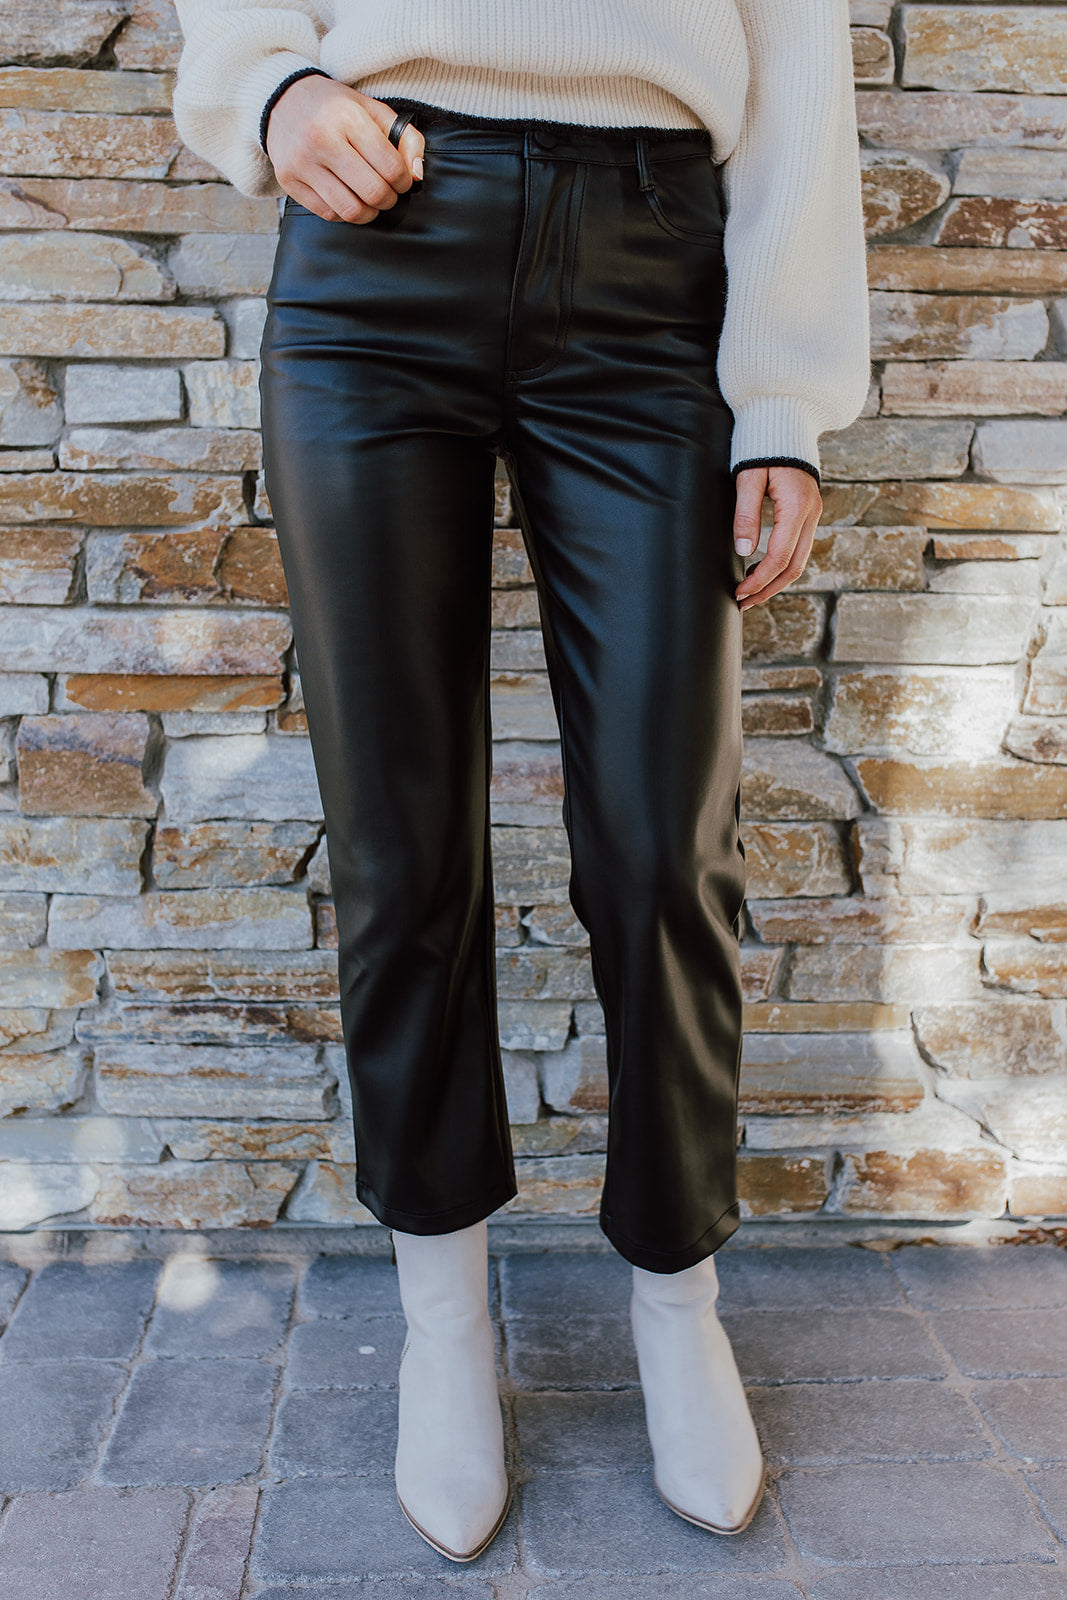 THE MOVES LIKE JAGGER FAUX LEATHER PANTS IN BLACK – Pink Desert